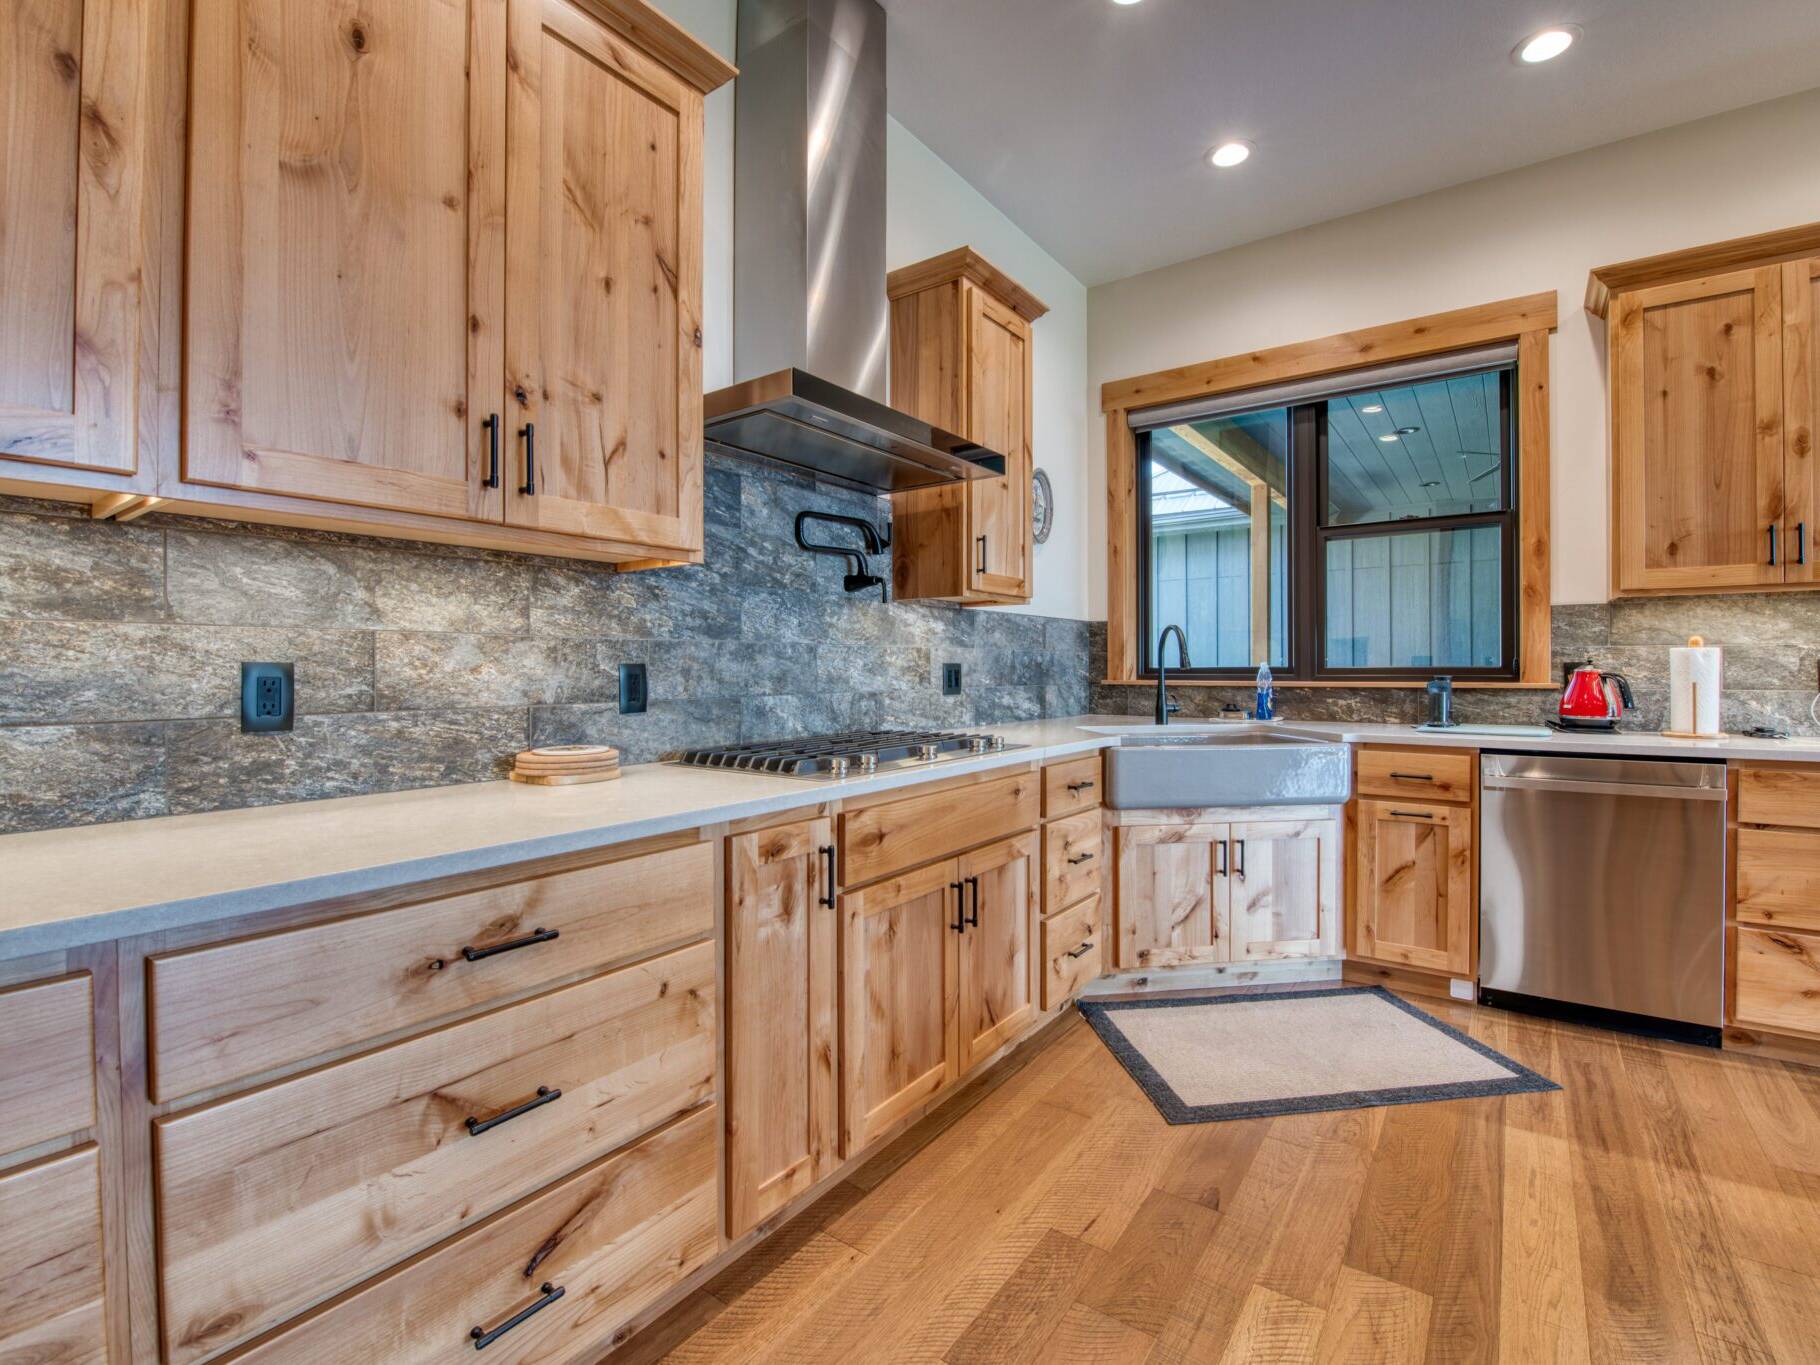 Kitchen with JenAir appliances, farmhouse sink, wood floors, alder cabinets, quarts countertops, and slate tile backsplash in a custom home built by Big Sky Builders of Monana in Florence, MT